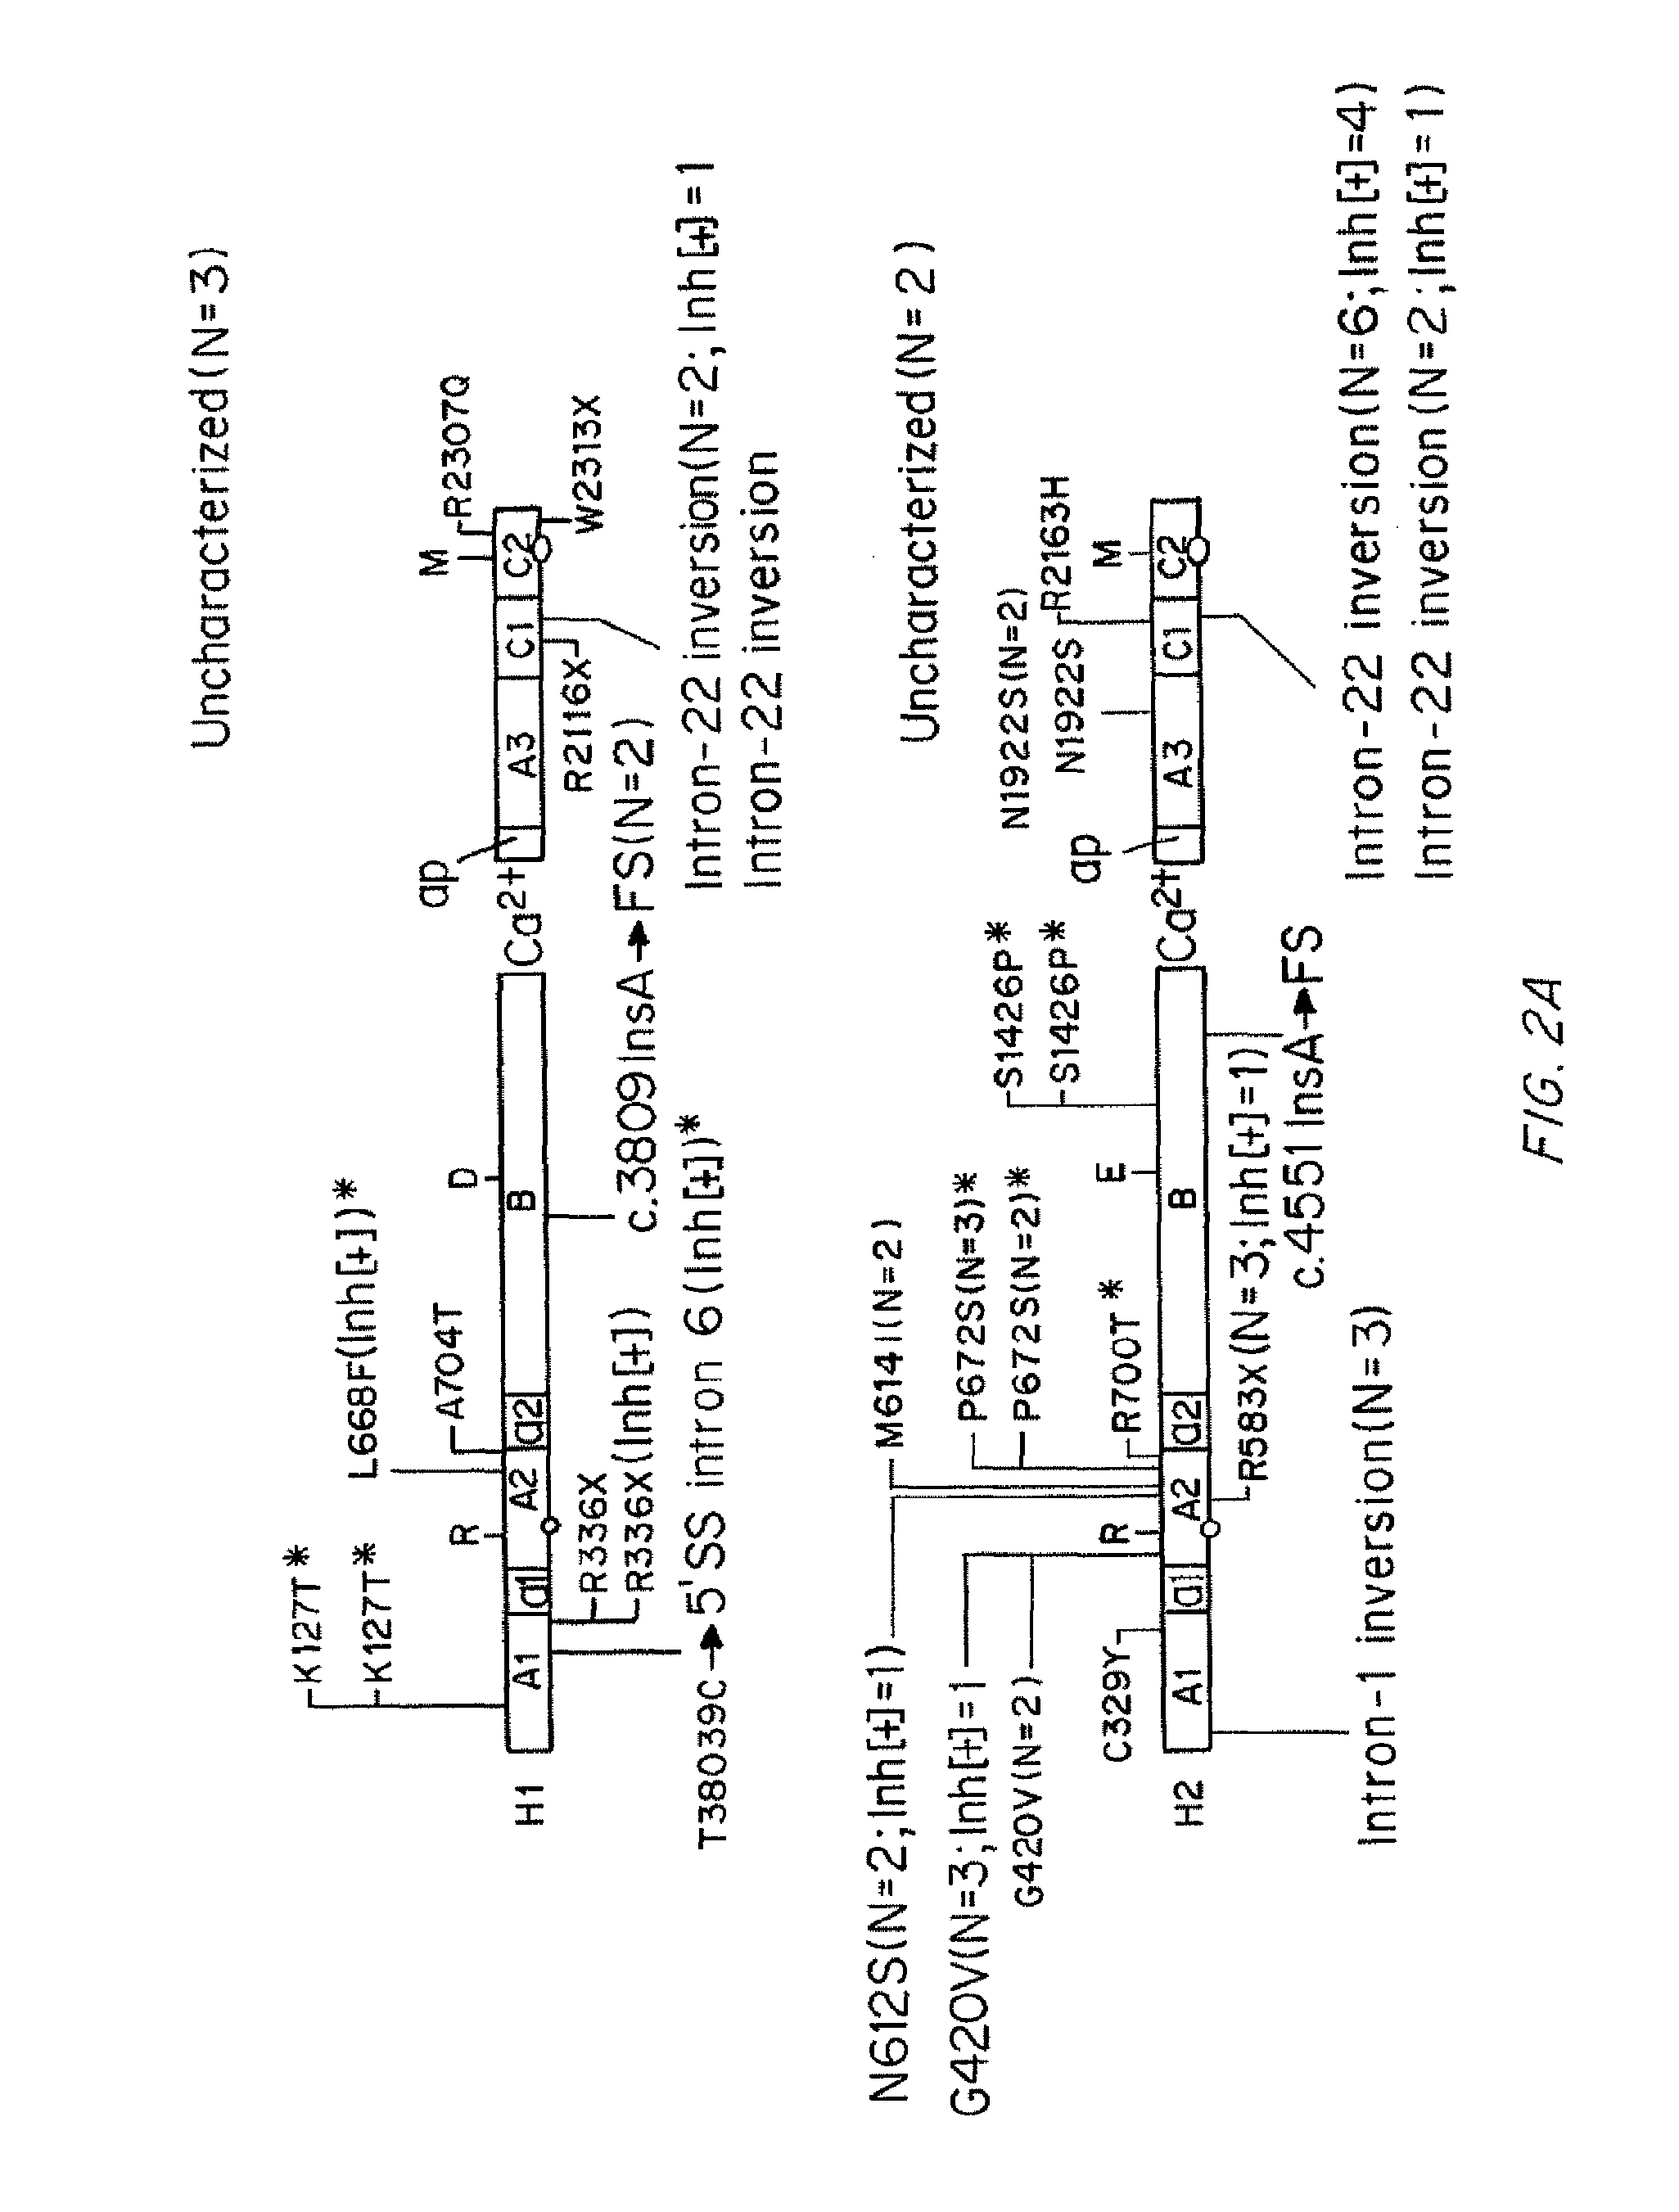 Compositions and Methods of Treatment of Black Hemophiliac Patients